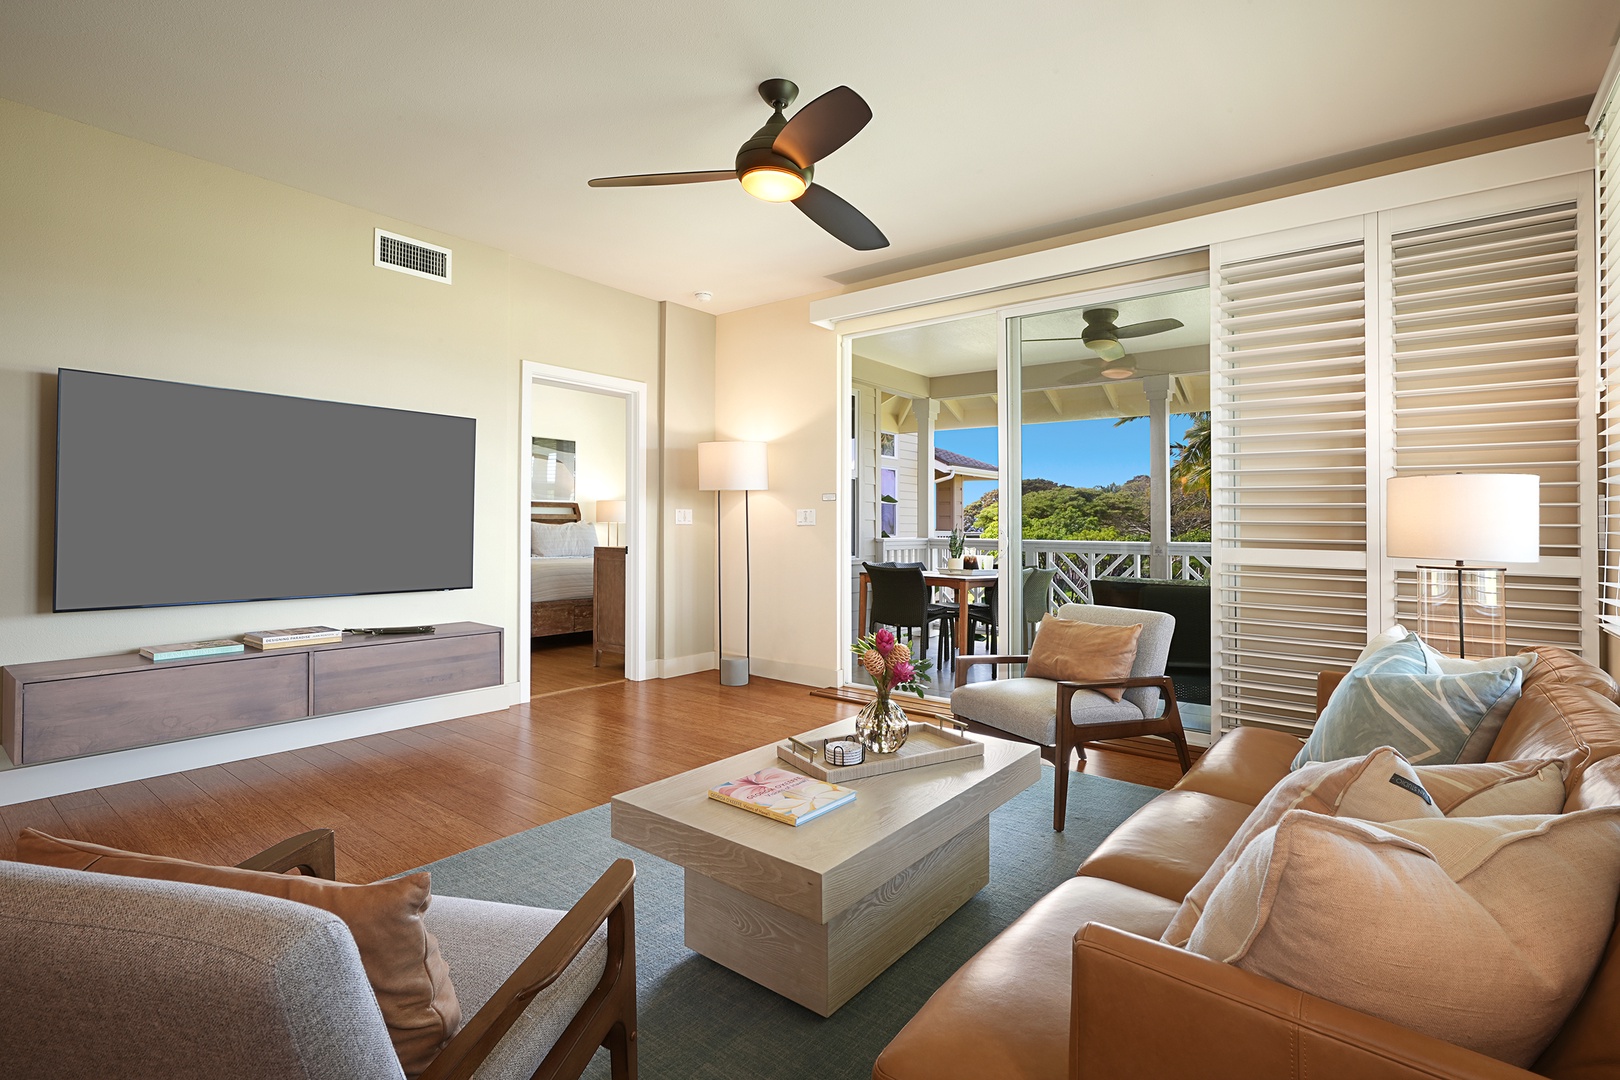 Koloa Vacation Rentals, Pili Mai 11K - Cool down, relax, and enjoy a movie with friends and family.